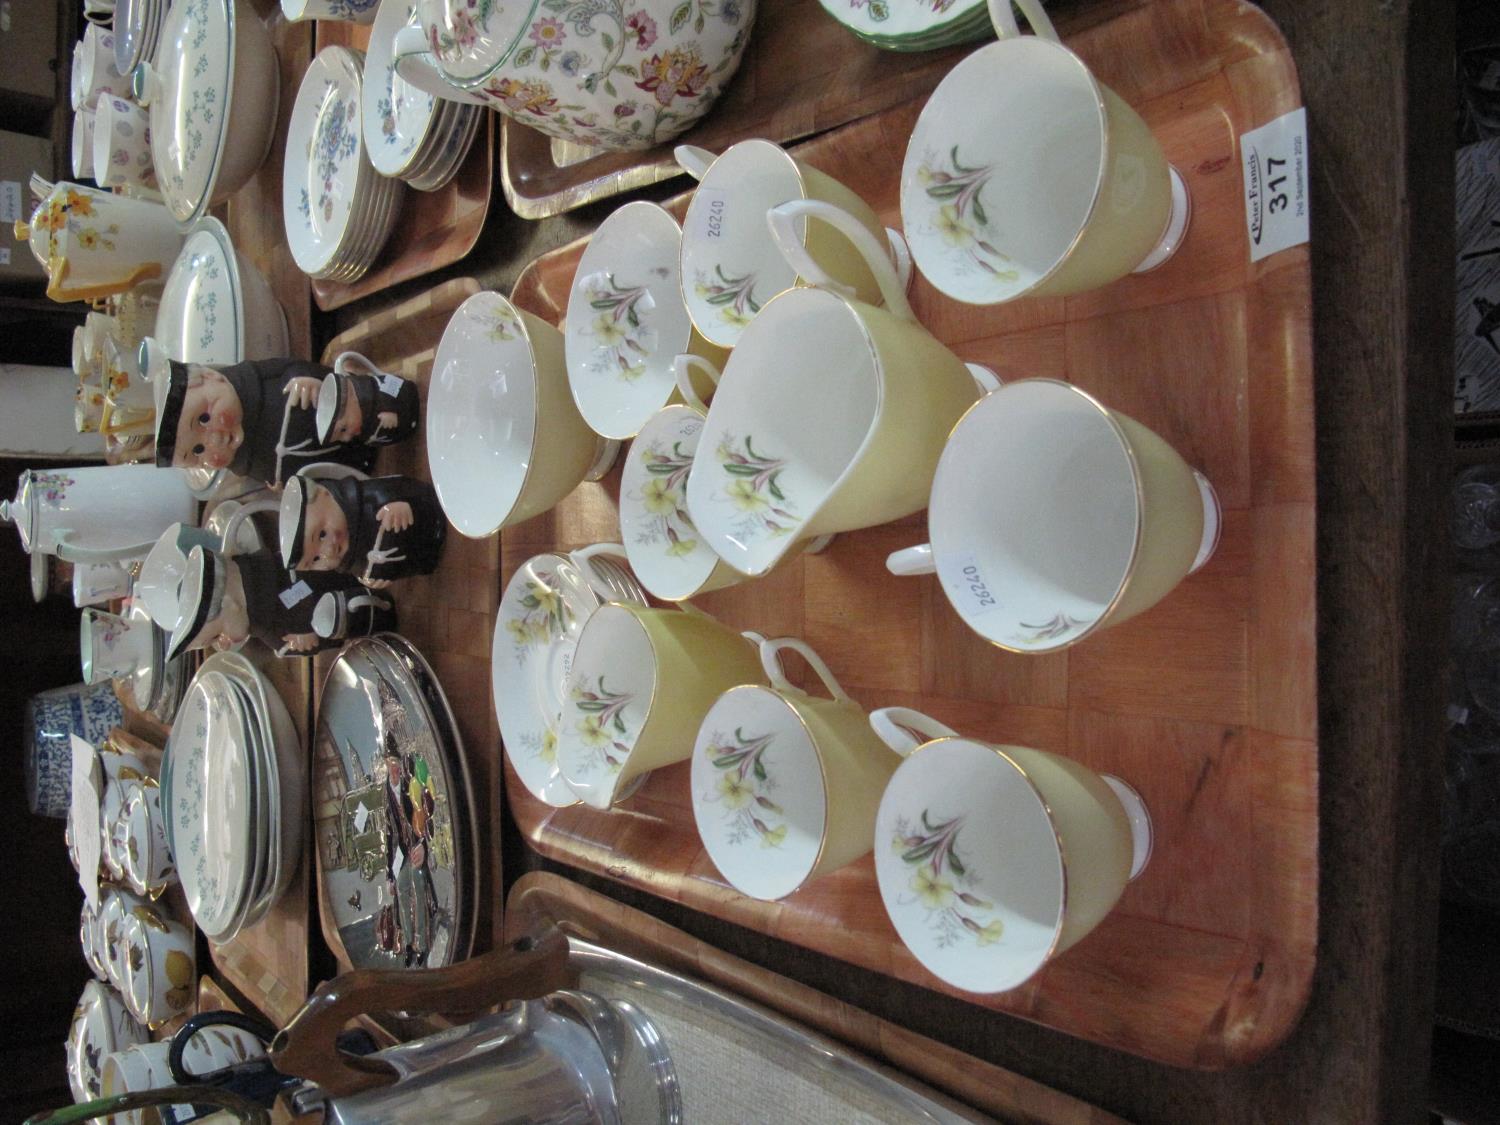 16 piece Royal Albert bone china coffee set on a lemon ground, internally decorated with floral